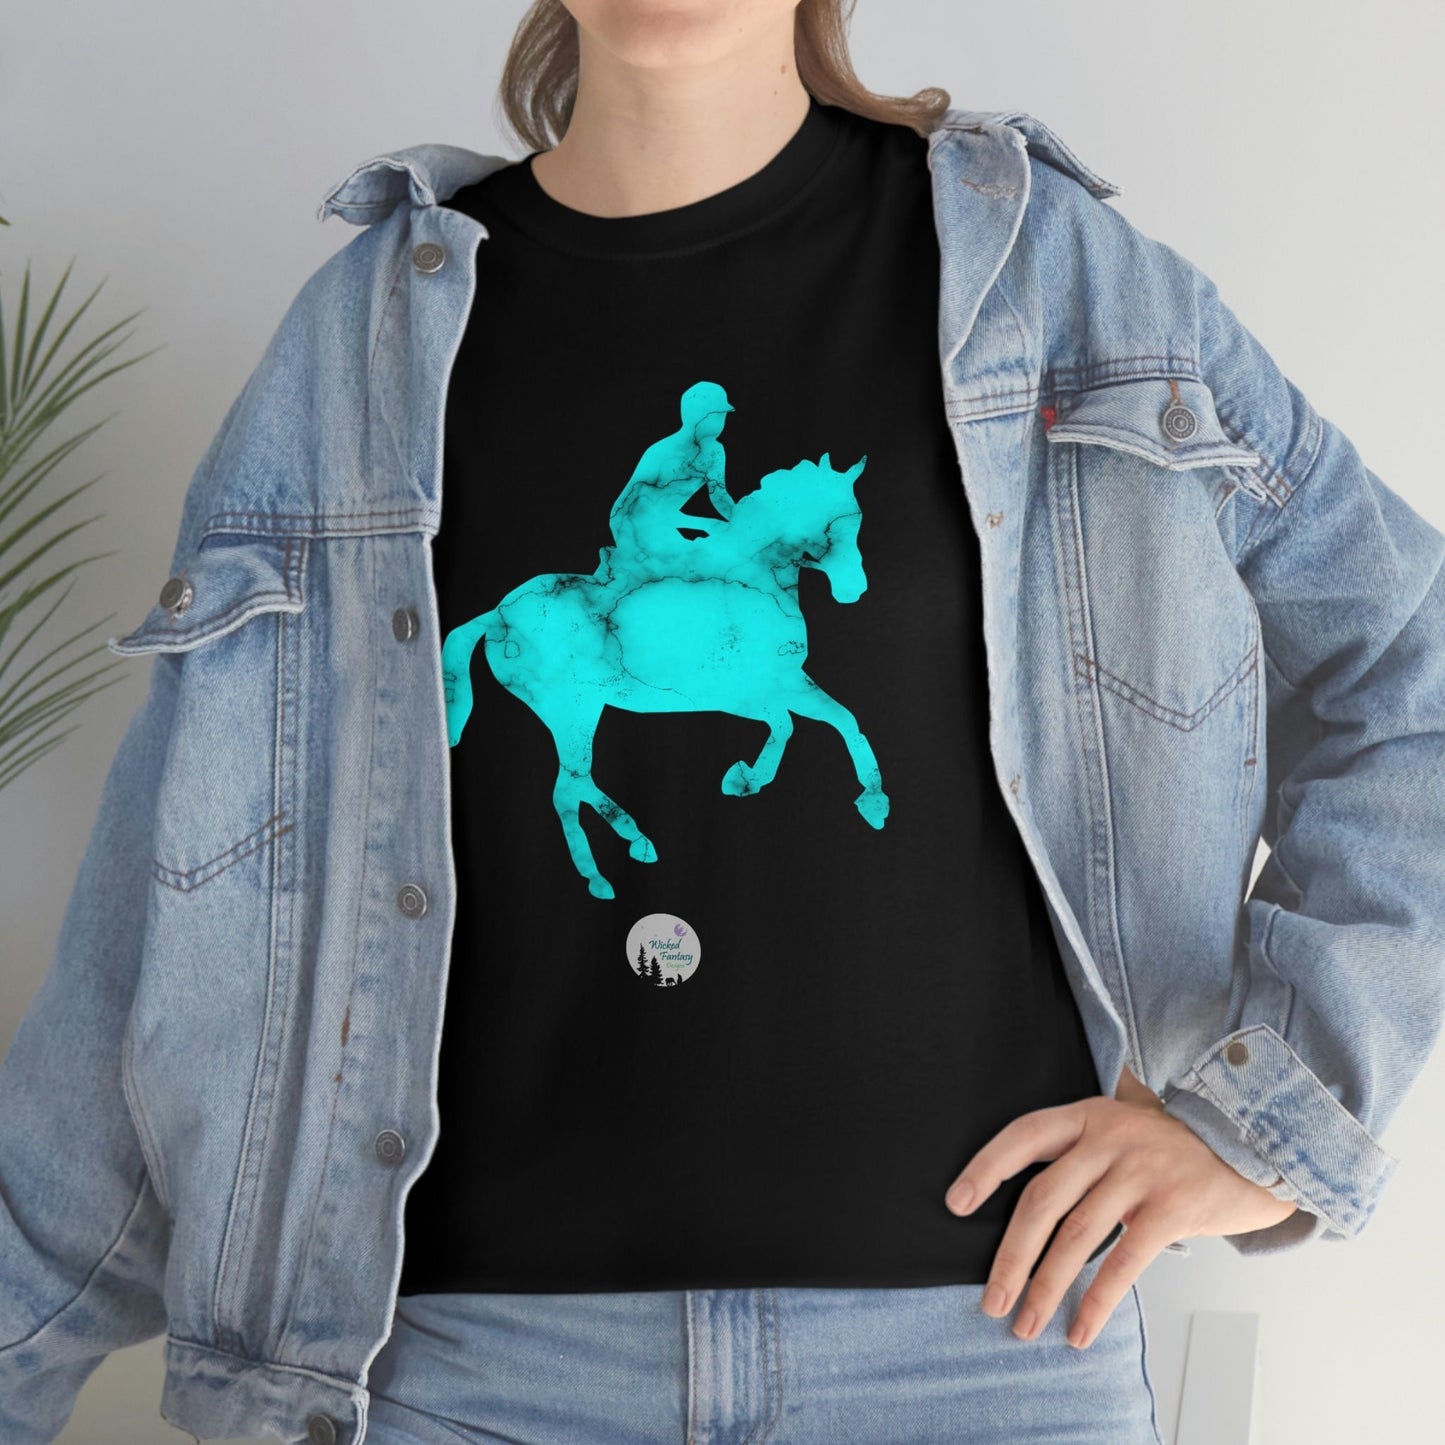 Turquoise Gemstone Eventing Horse Cross Country Horse English Edgy Cute Heavy Cotton Tee